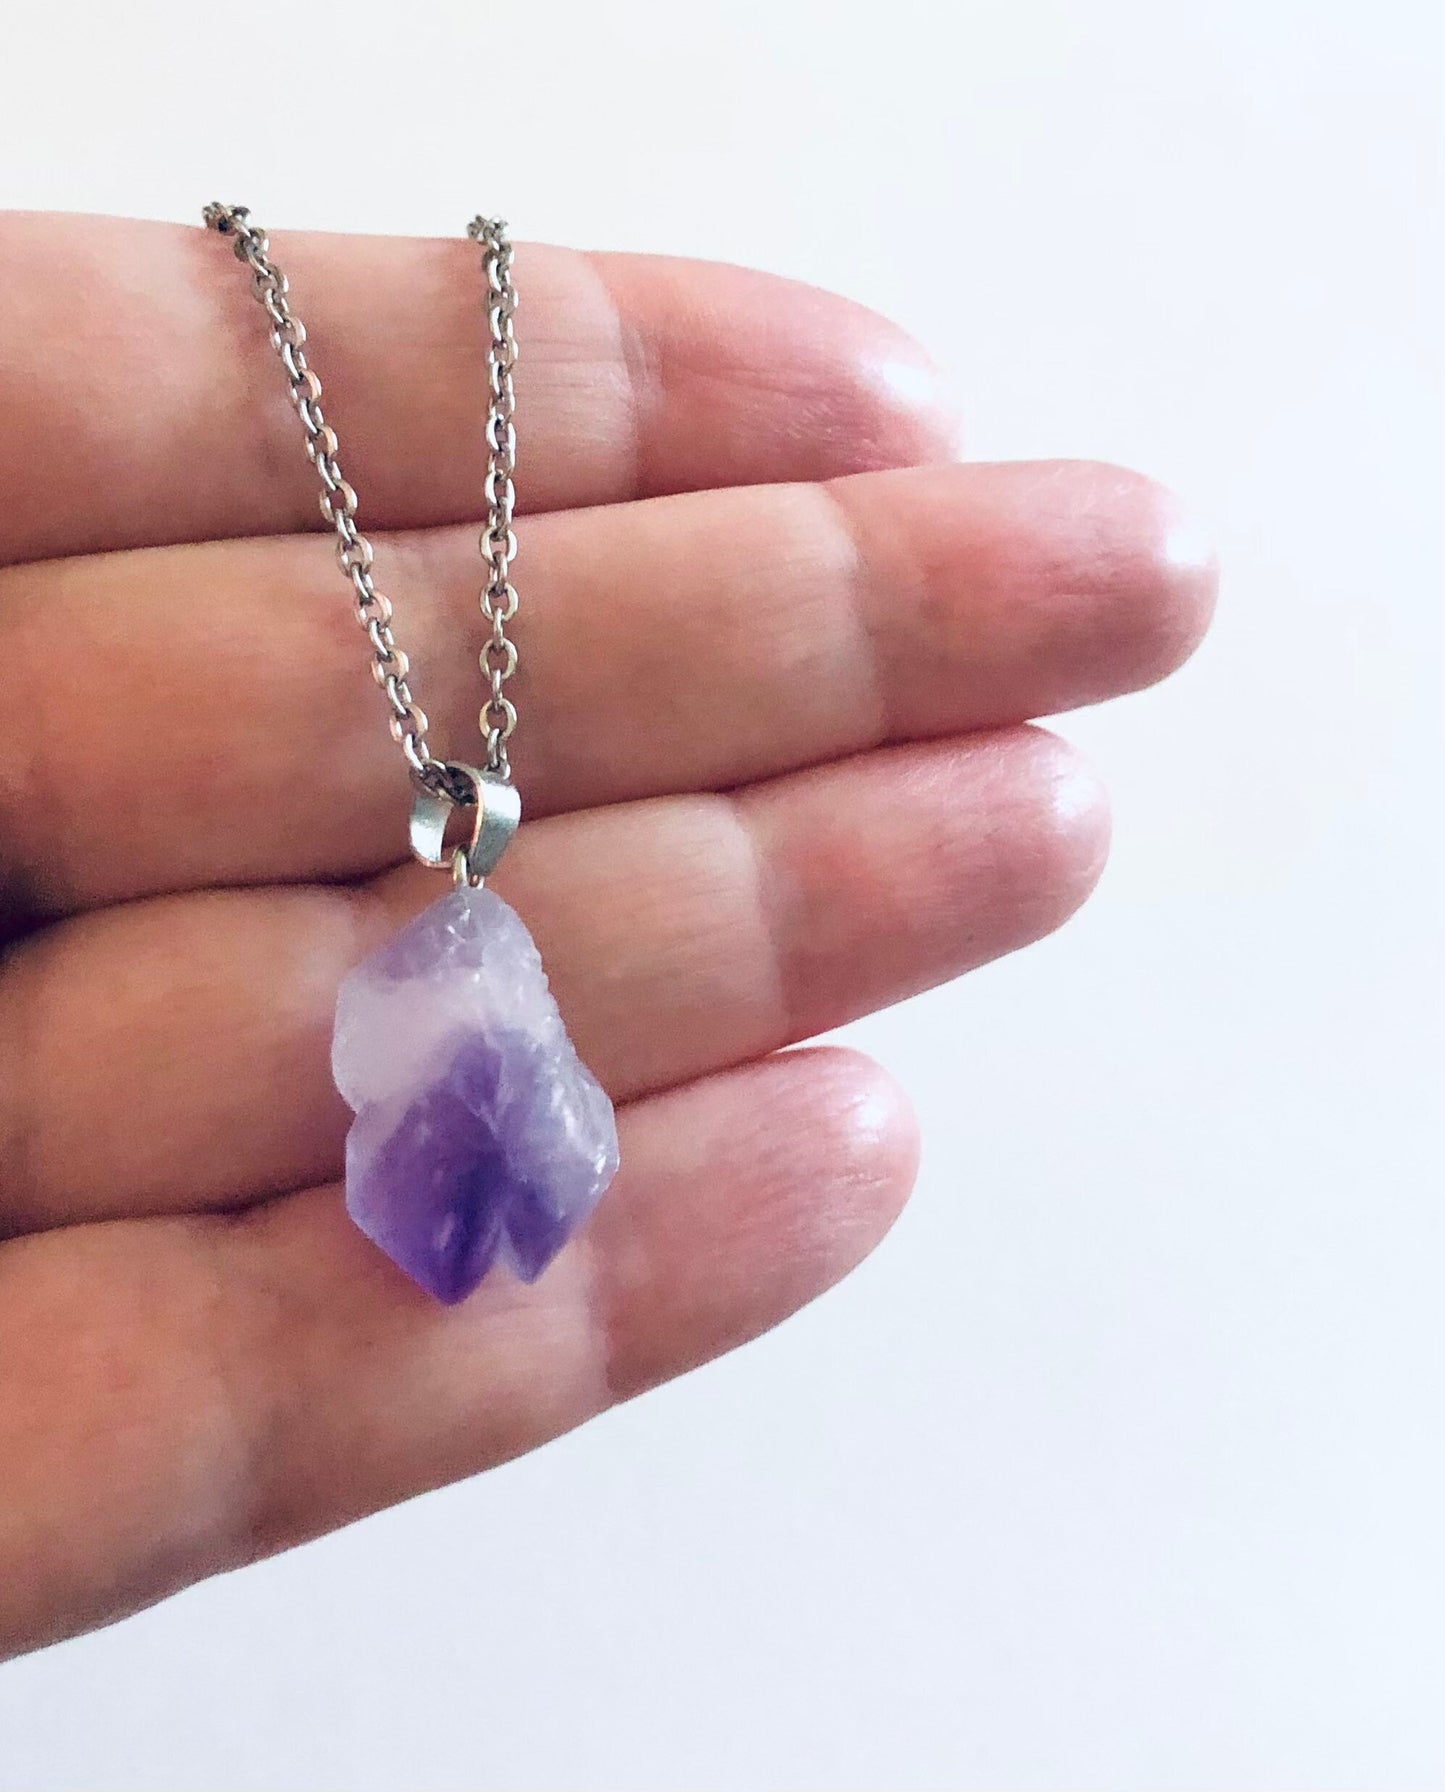 Amethyst Necklace, Real Raw Natural Crystal Necklace, Silver Chain. Hippie Boho Witchy Jewelry Bohemian Yoga Necklace